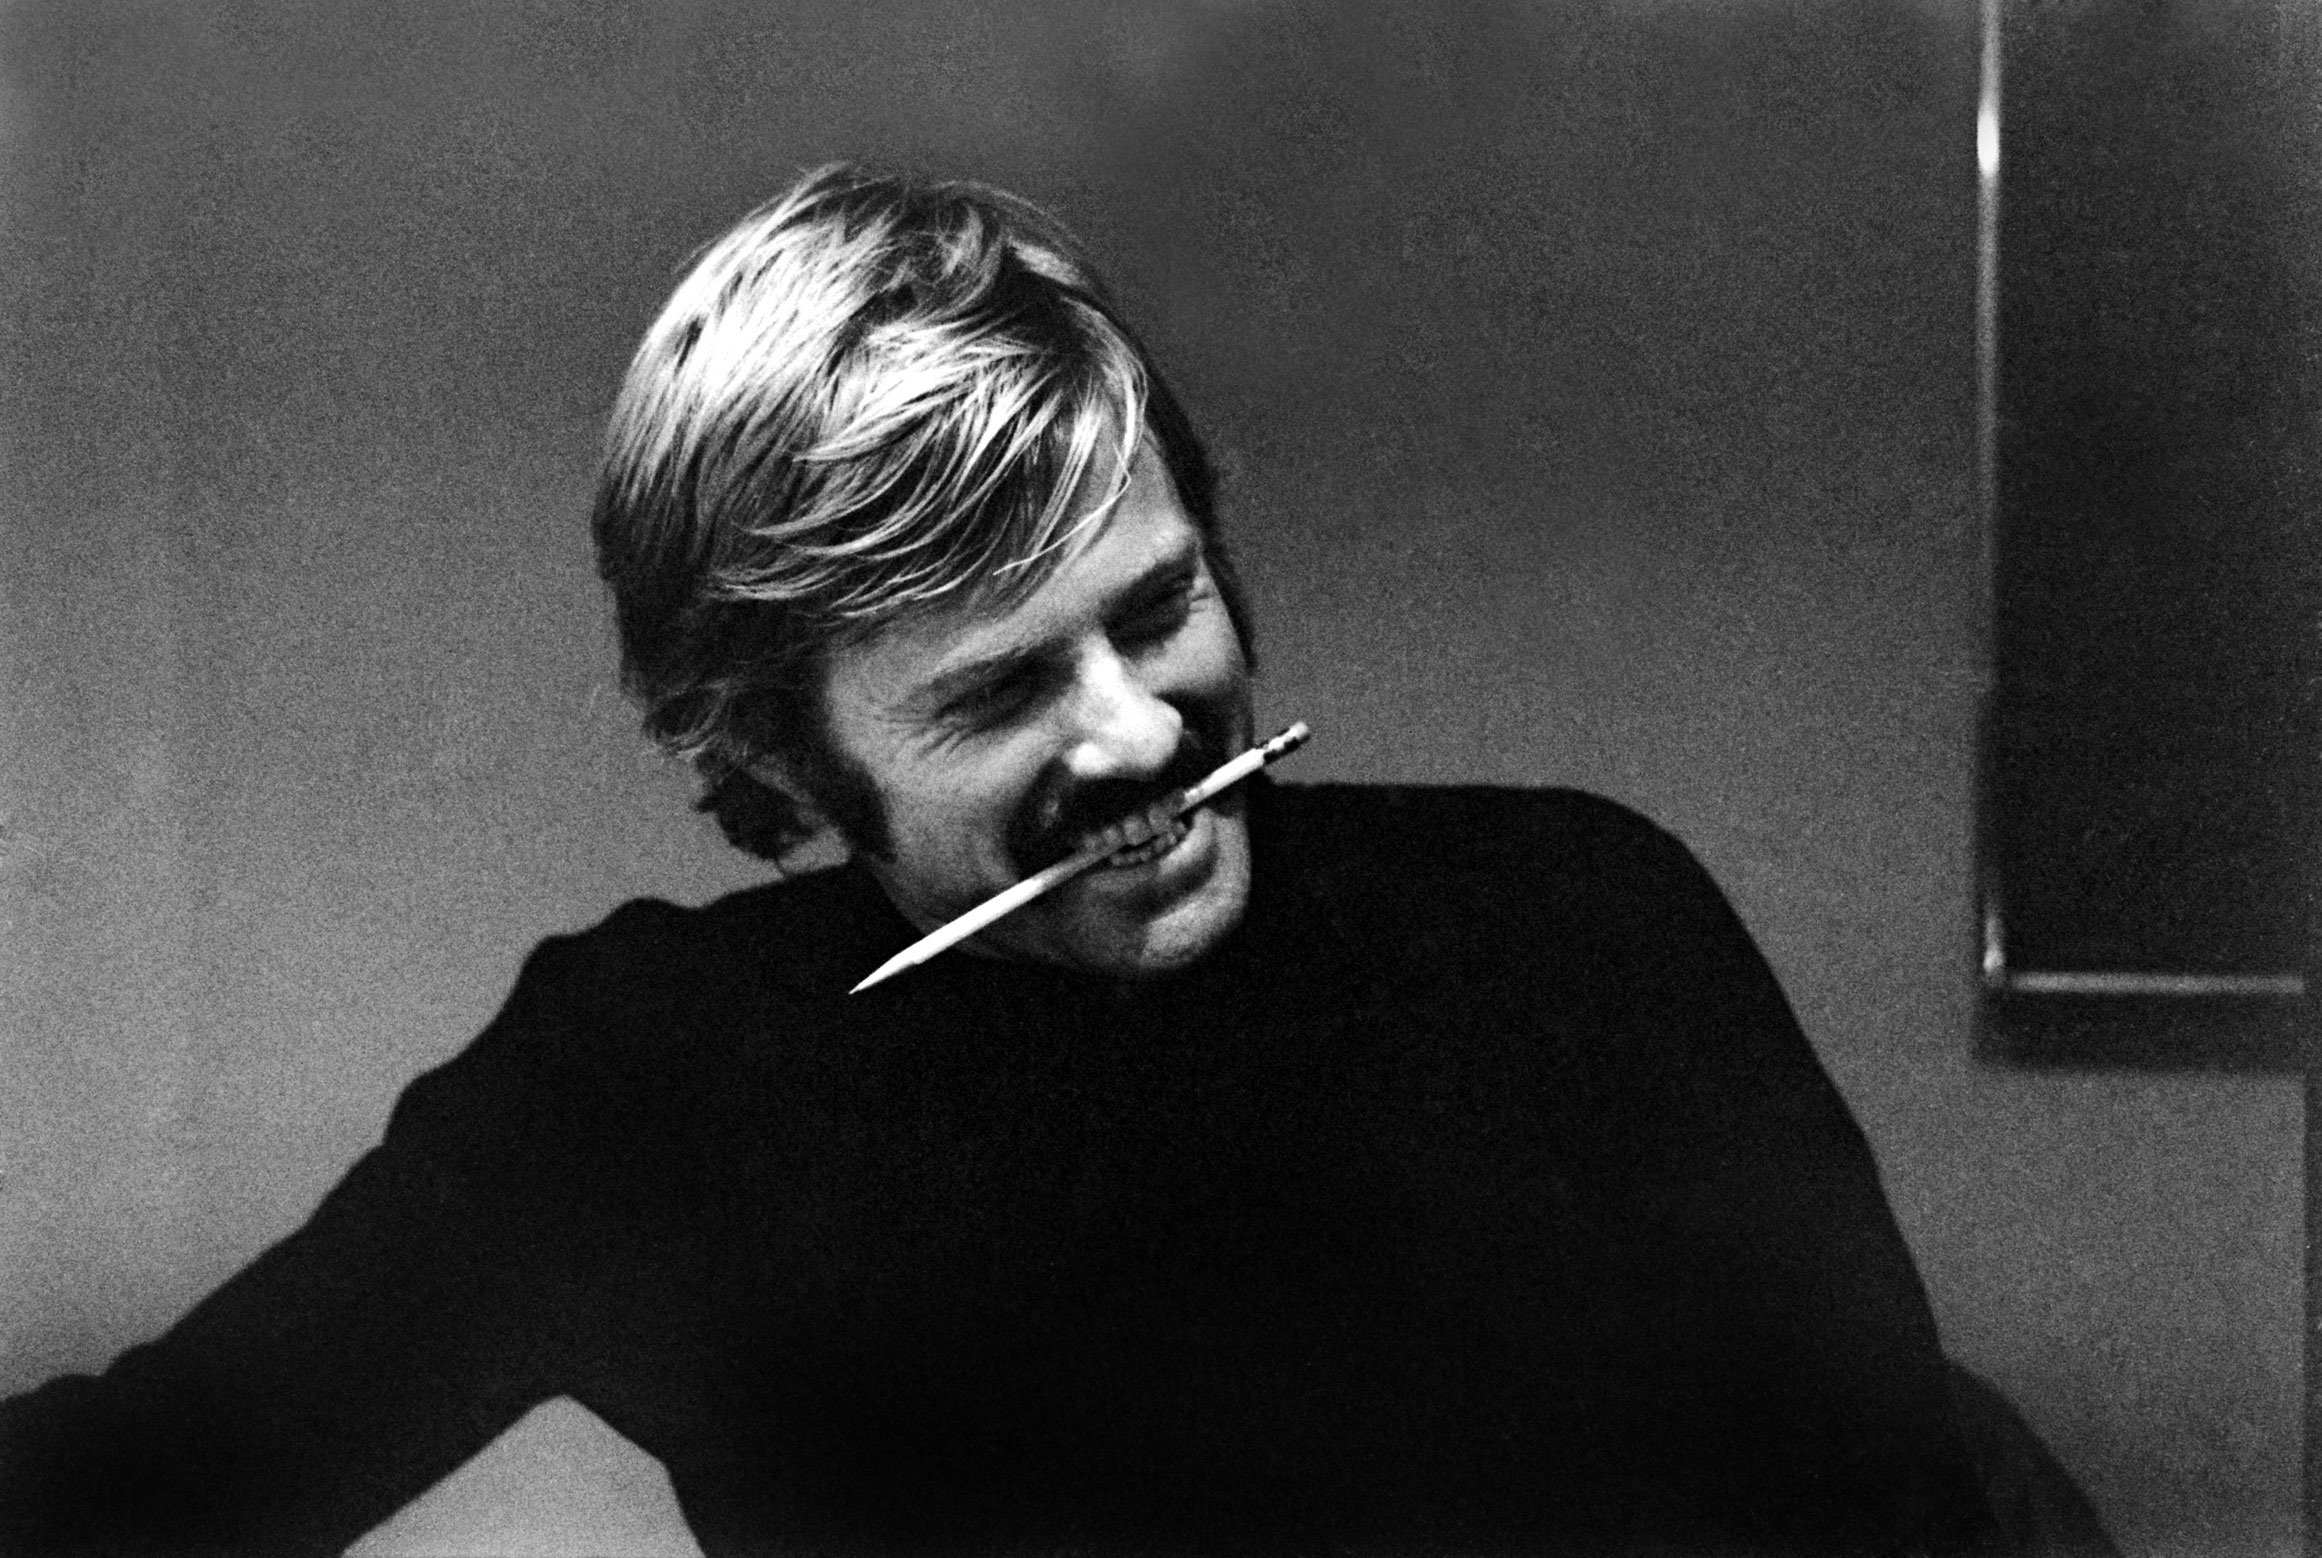 Robert Redford grins in his agent's office in New York 1969